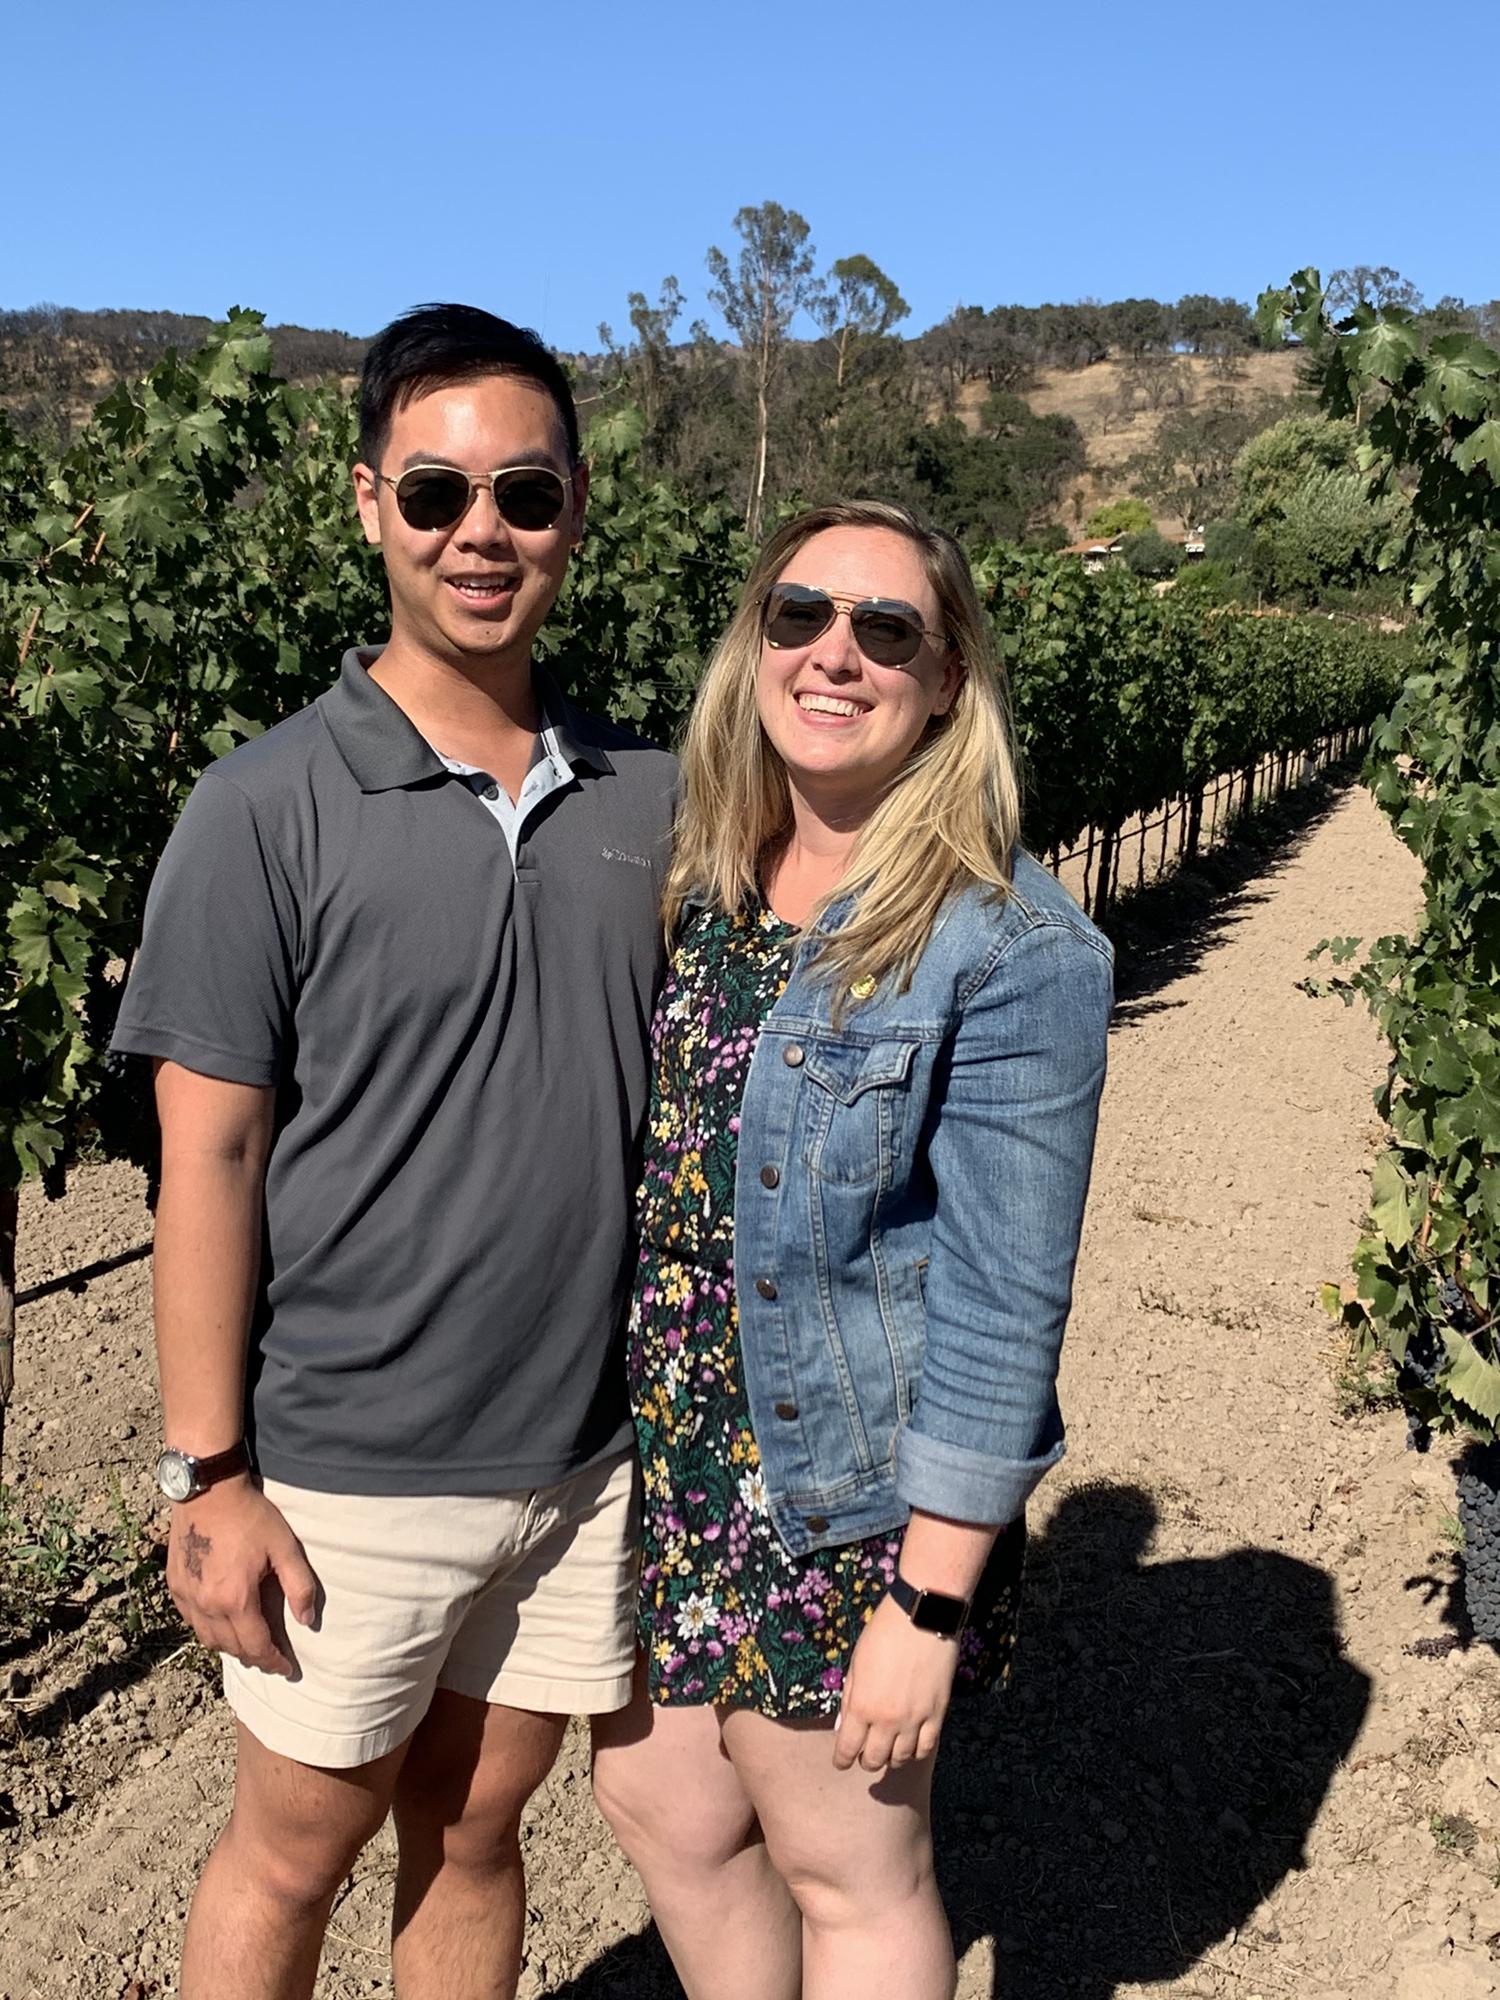 At a Napa winery in 2019